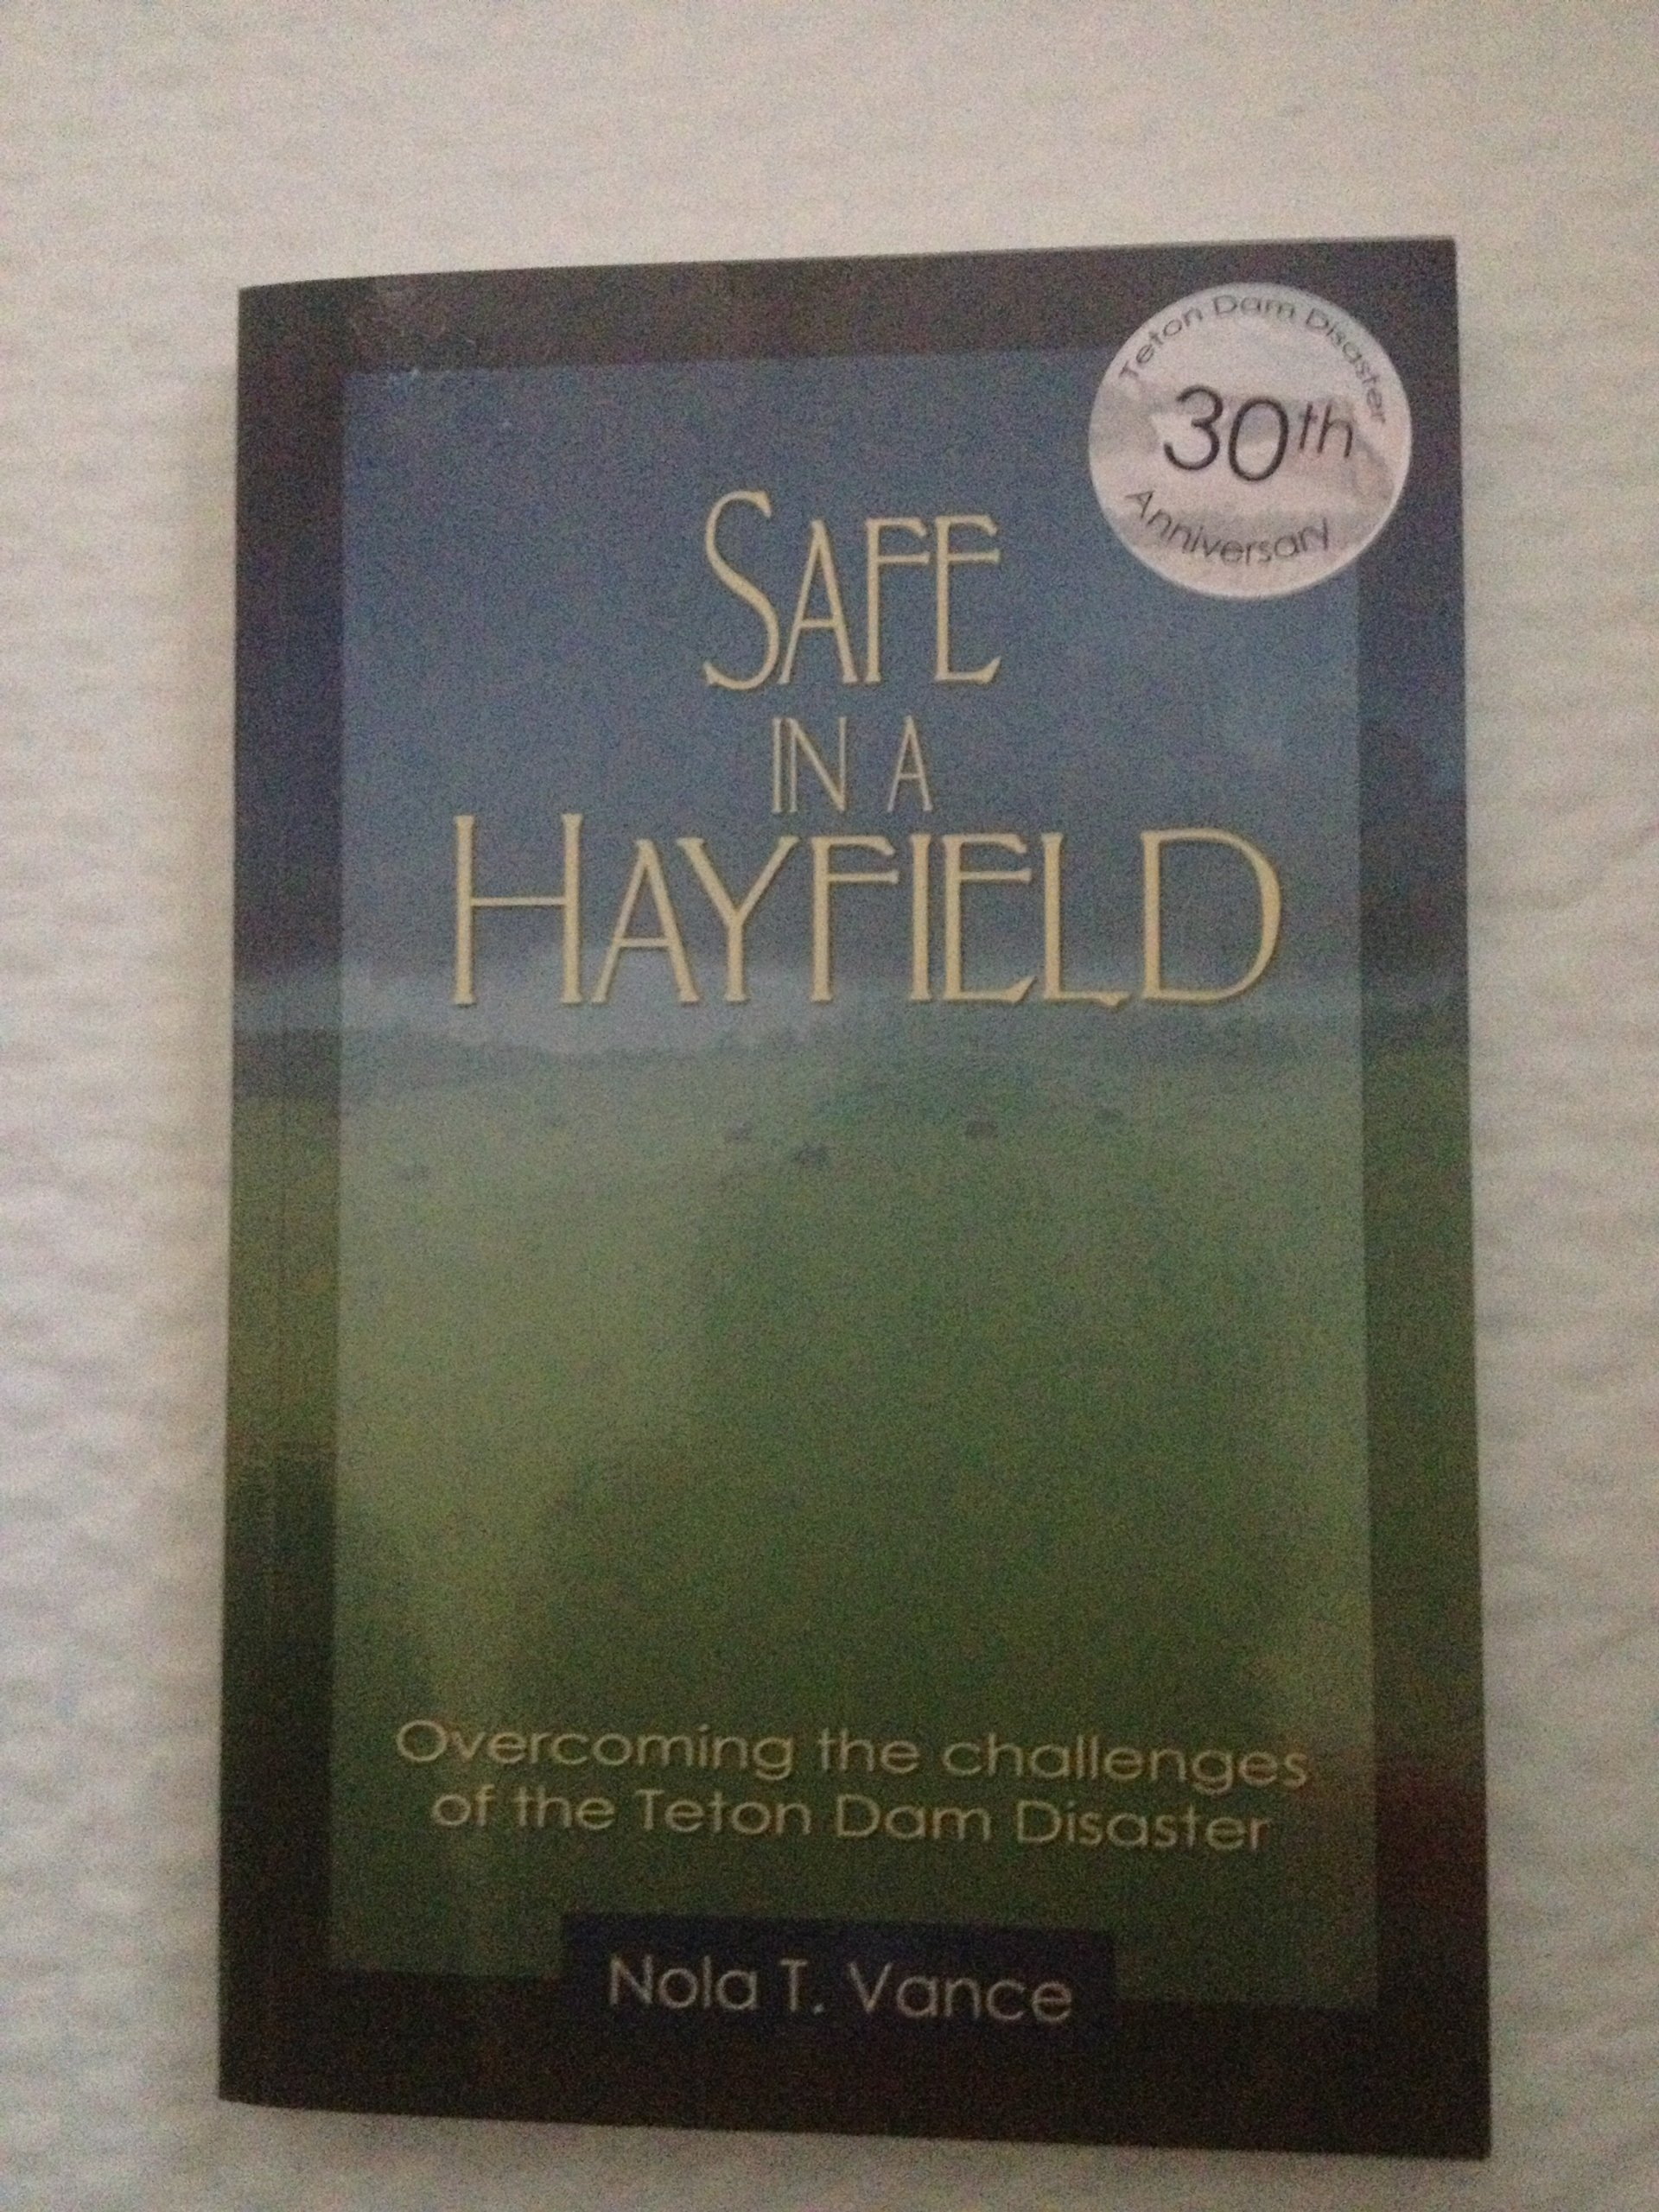 Safe in a hayfield: Overcoming the challenges of the Teton Dam Flood disaster (book cover)